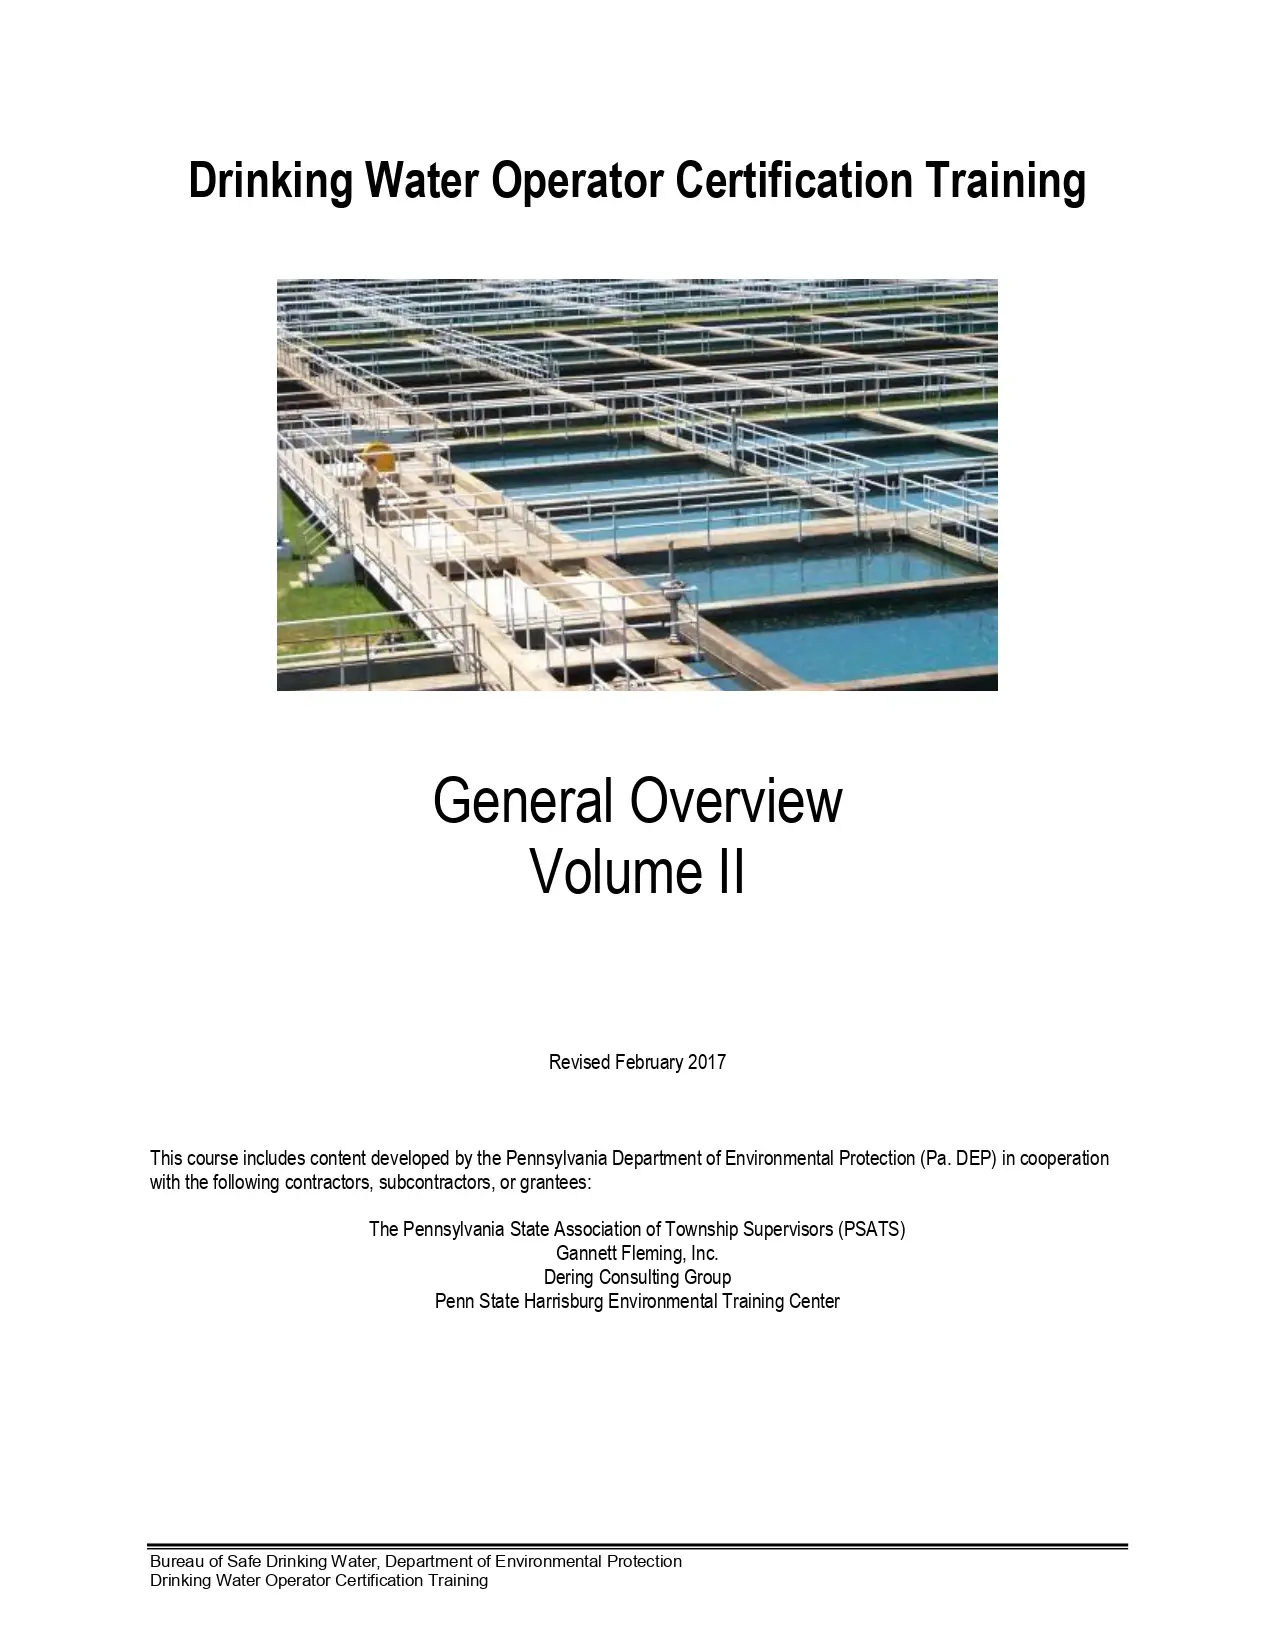 Drinking Water Operator Certification Training (General Overview Volume II)